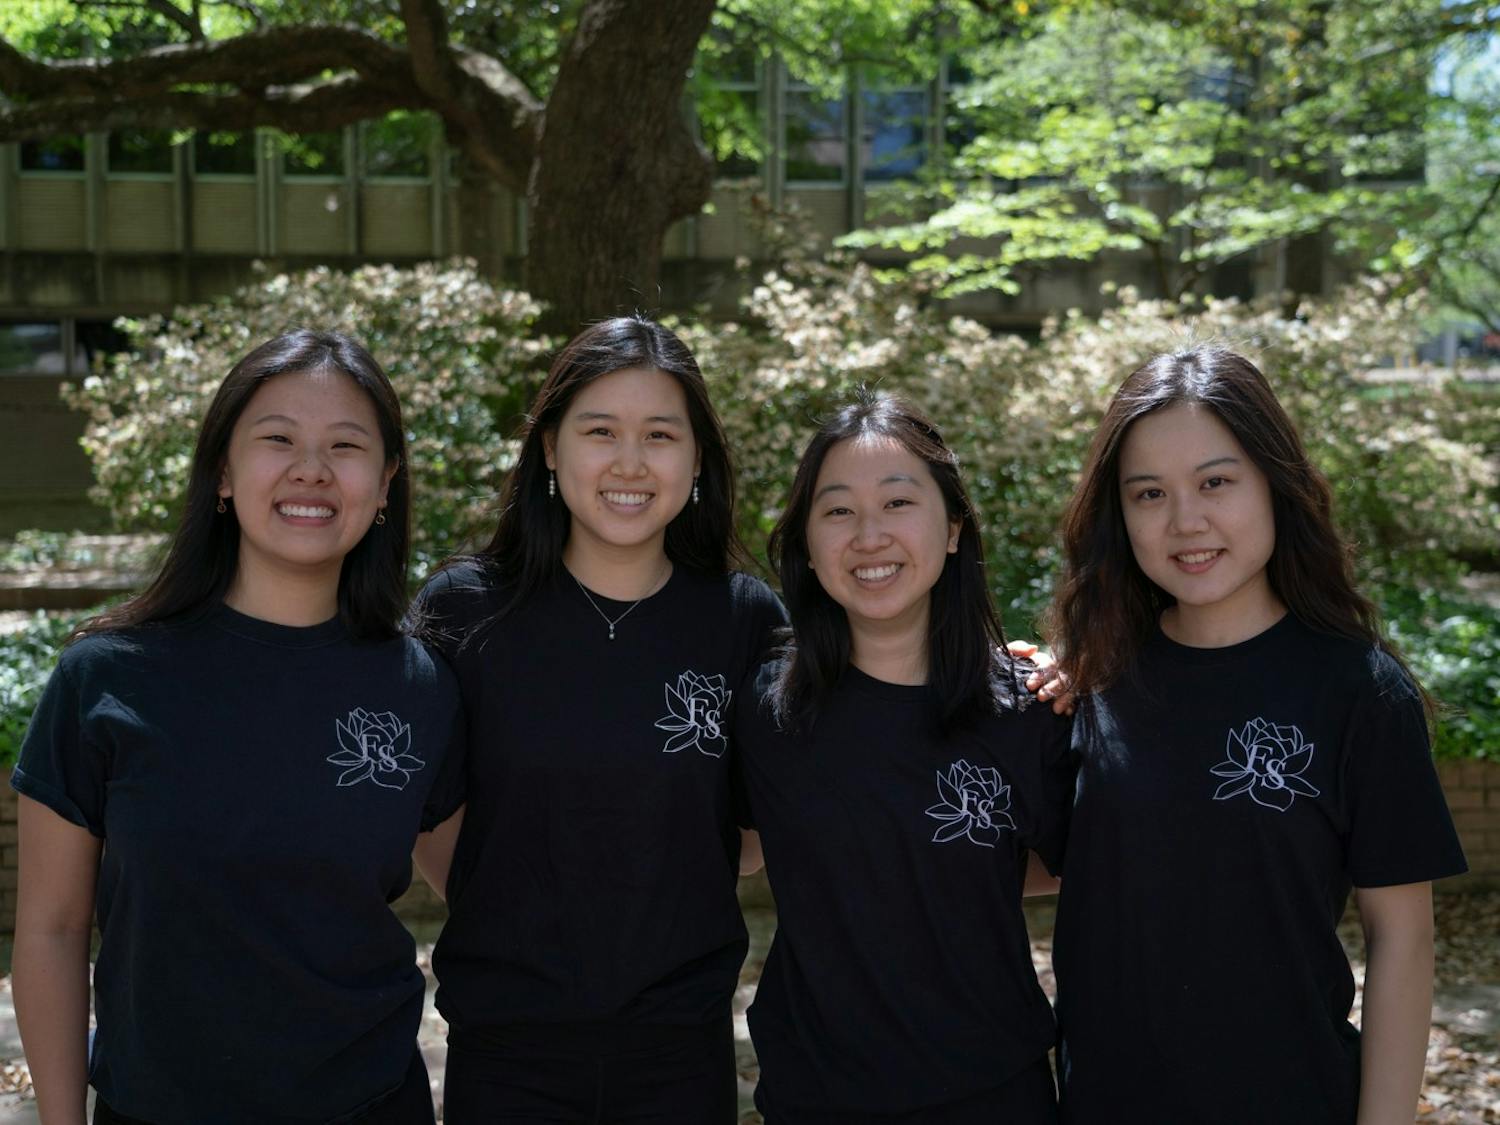 Seanna Chen, Katherine Zhang, Grace Chow, and Carina Lin (left to right) pose for a portrait in the Coker Arboretum on Friday, April 15, 2022. Chen, Zhang, Chow, and Lin are members of UNC's Flying Silk, a Chinese dance group that focuses on ribbon and fan dance.